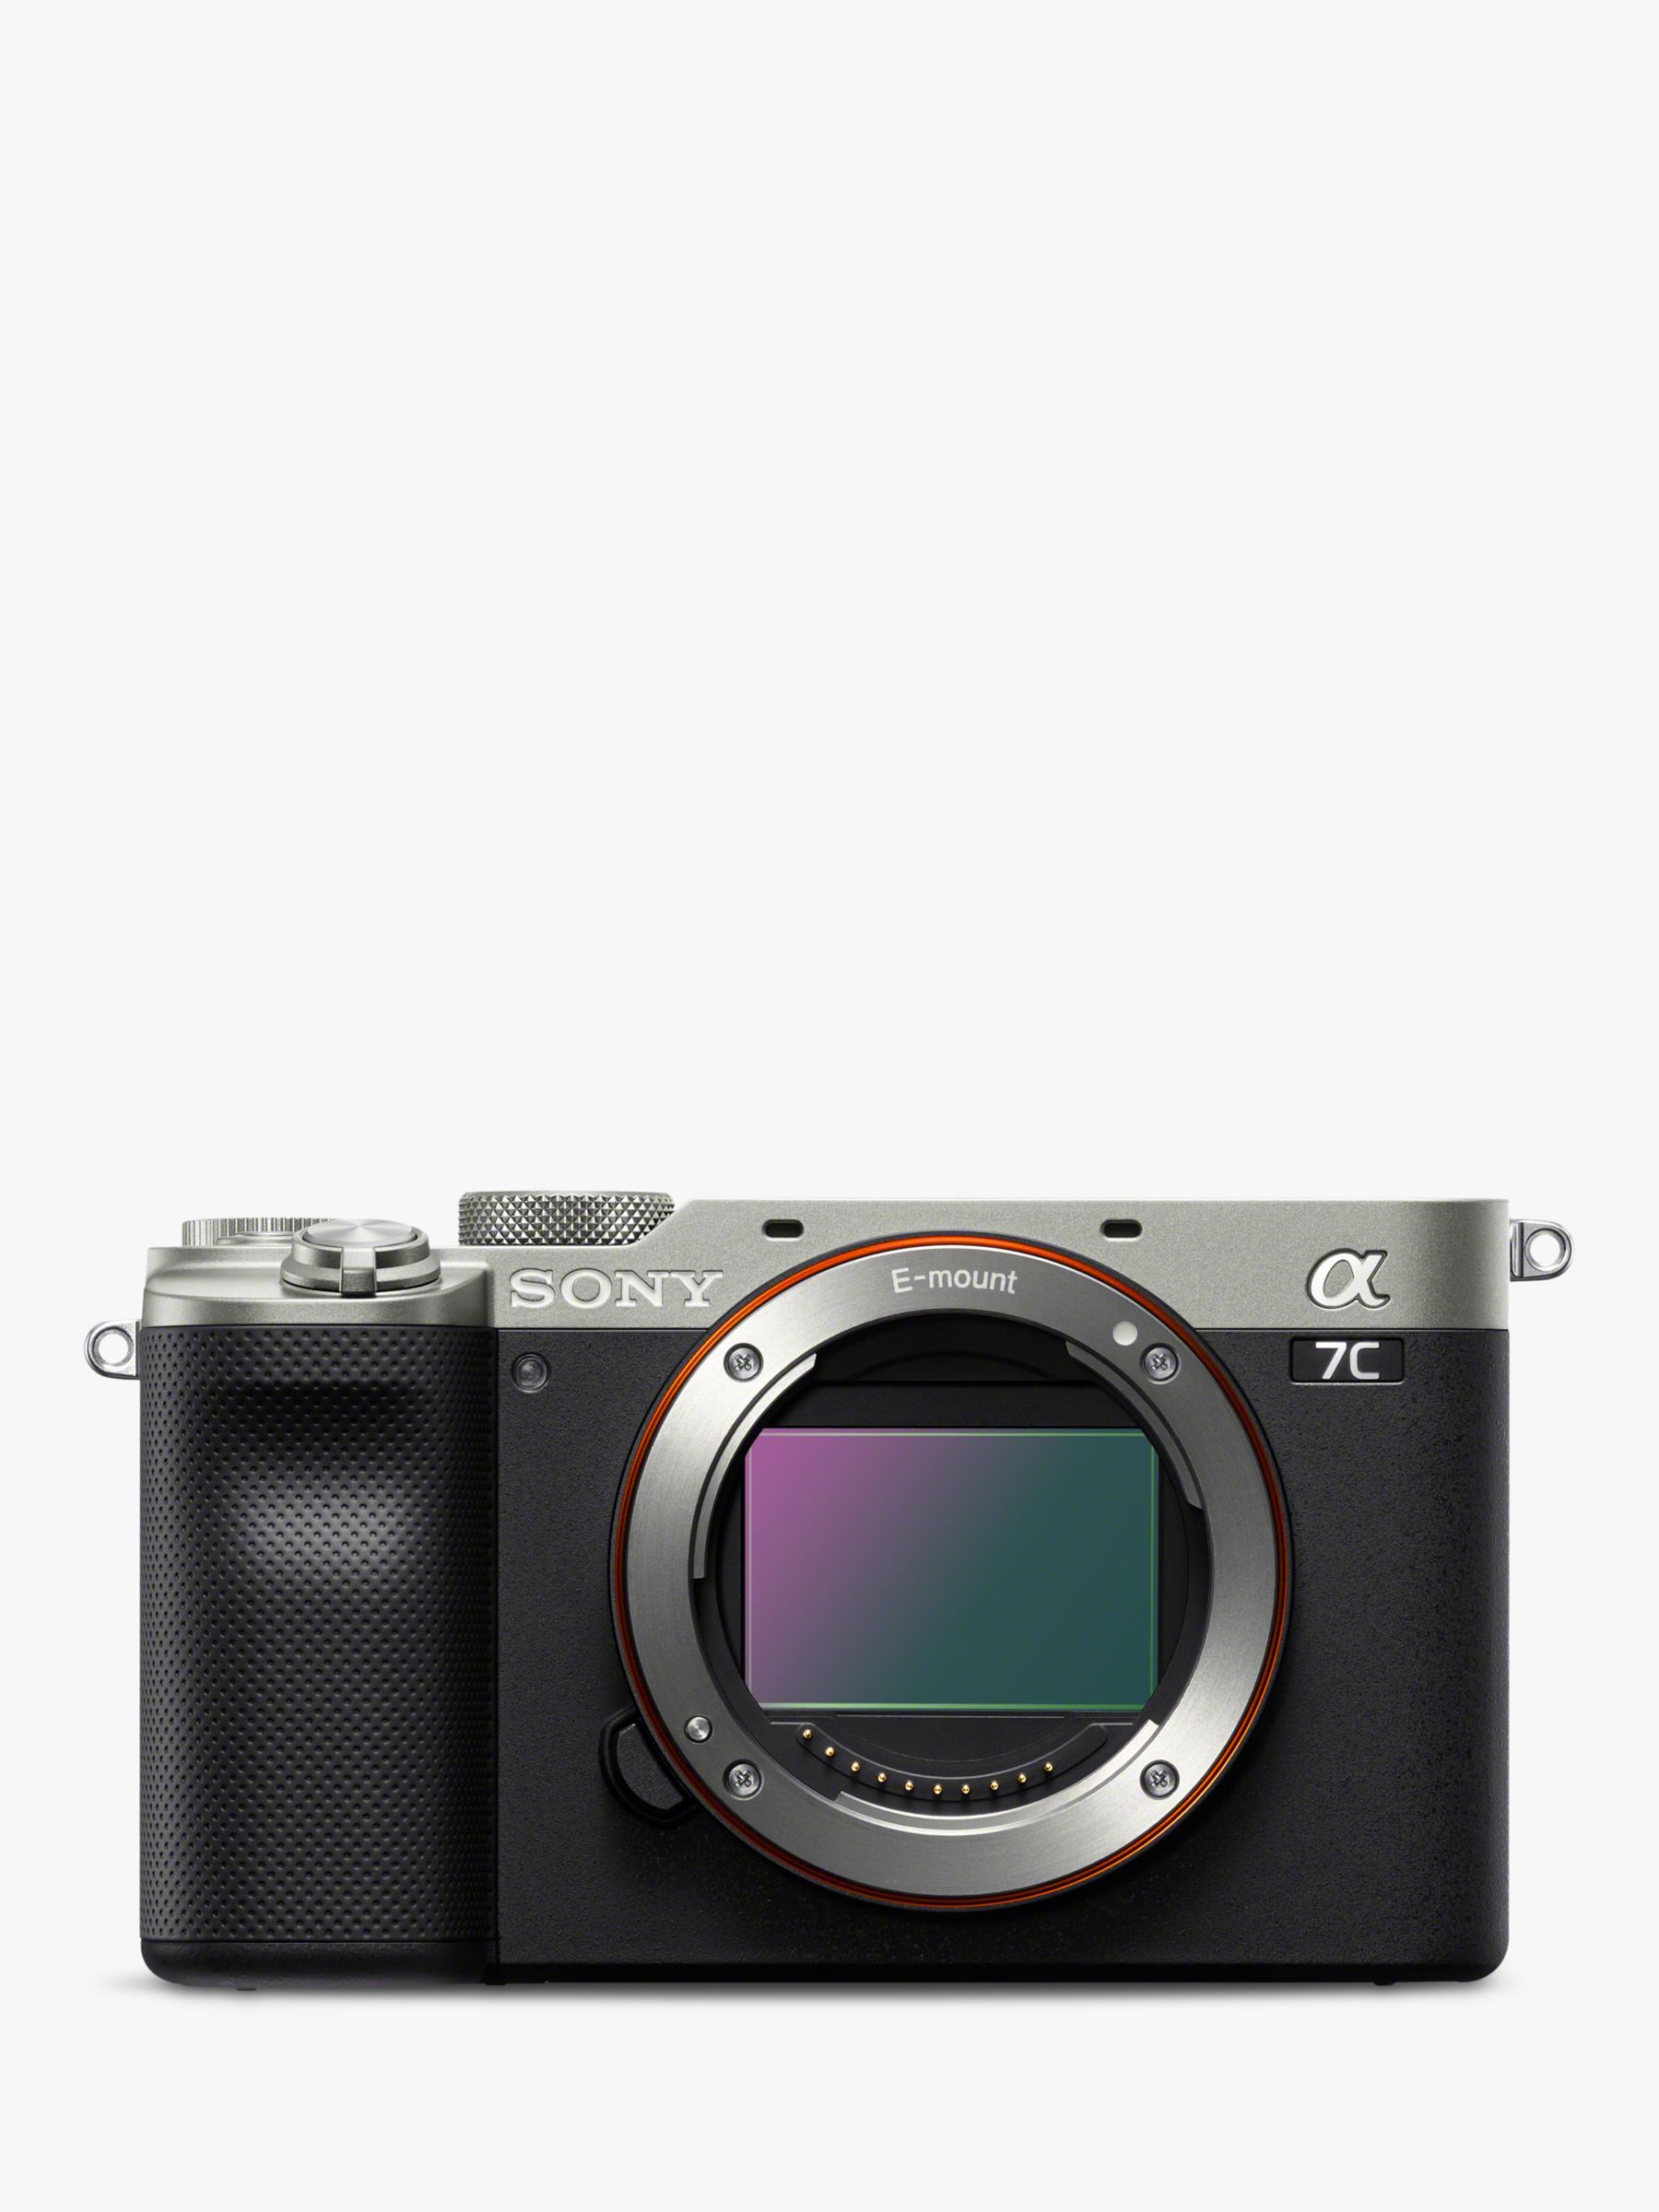 Image of Sony a7C Alpha ILCE7C Compact System Camera 4K Ultra HD 242MP WiFi Bluetooth NFC OLED EVF 5Axis Image Stabiliser and Variangle 3 LCD Touch Screen Body Only Silver